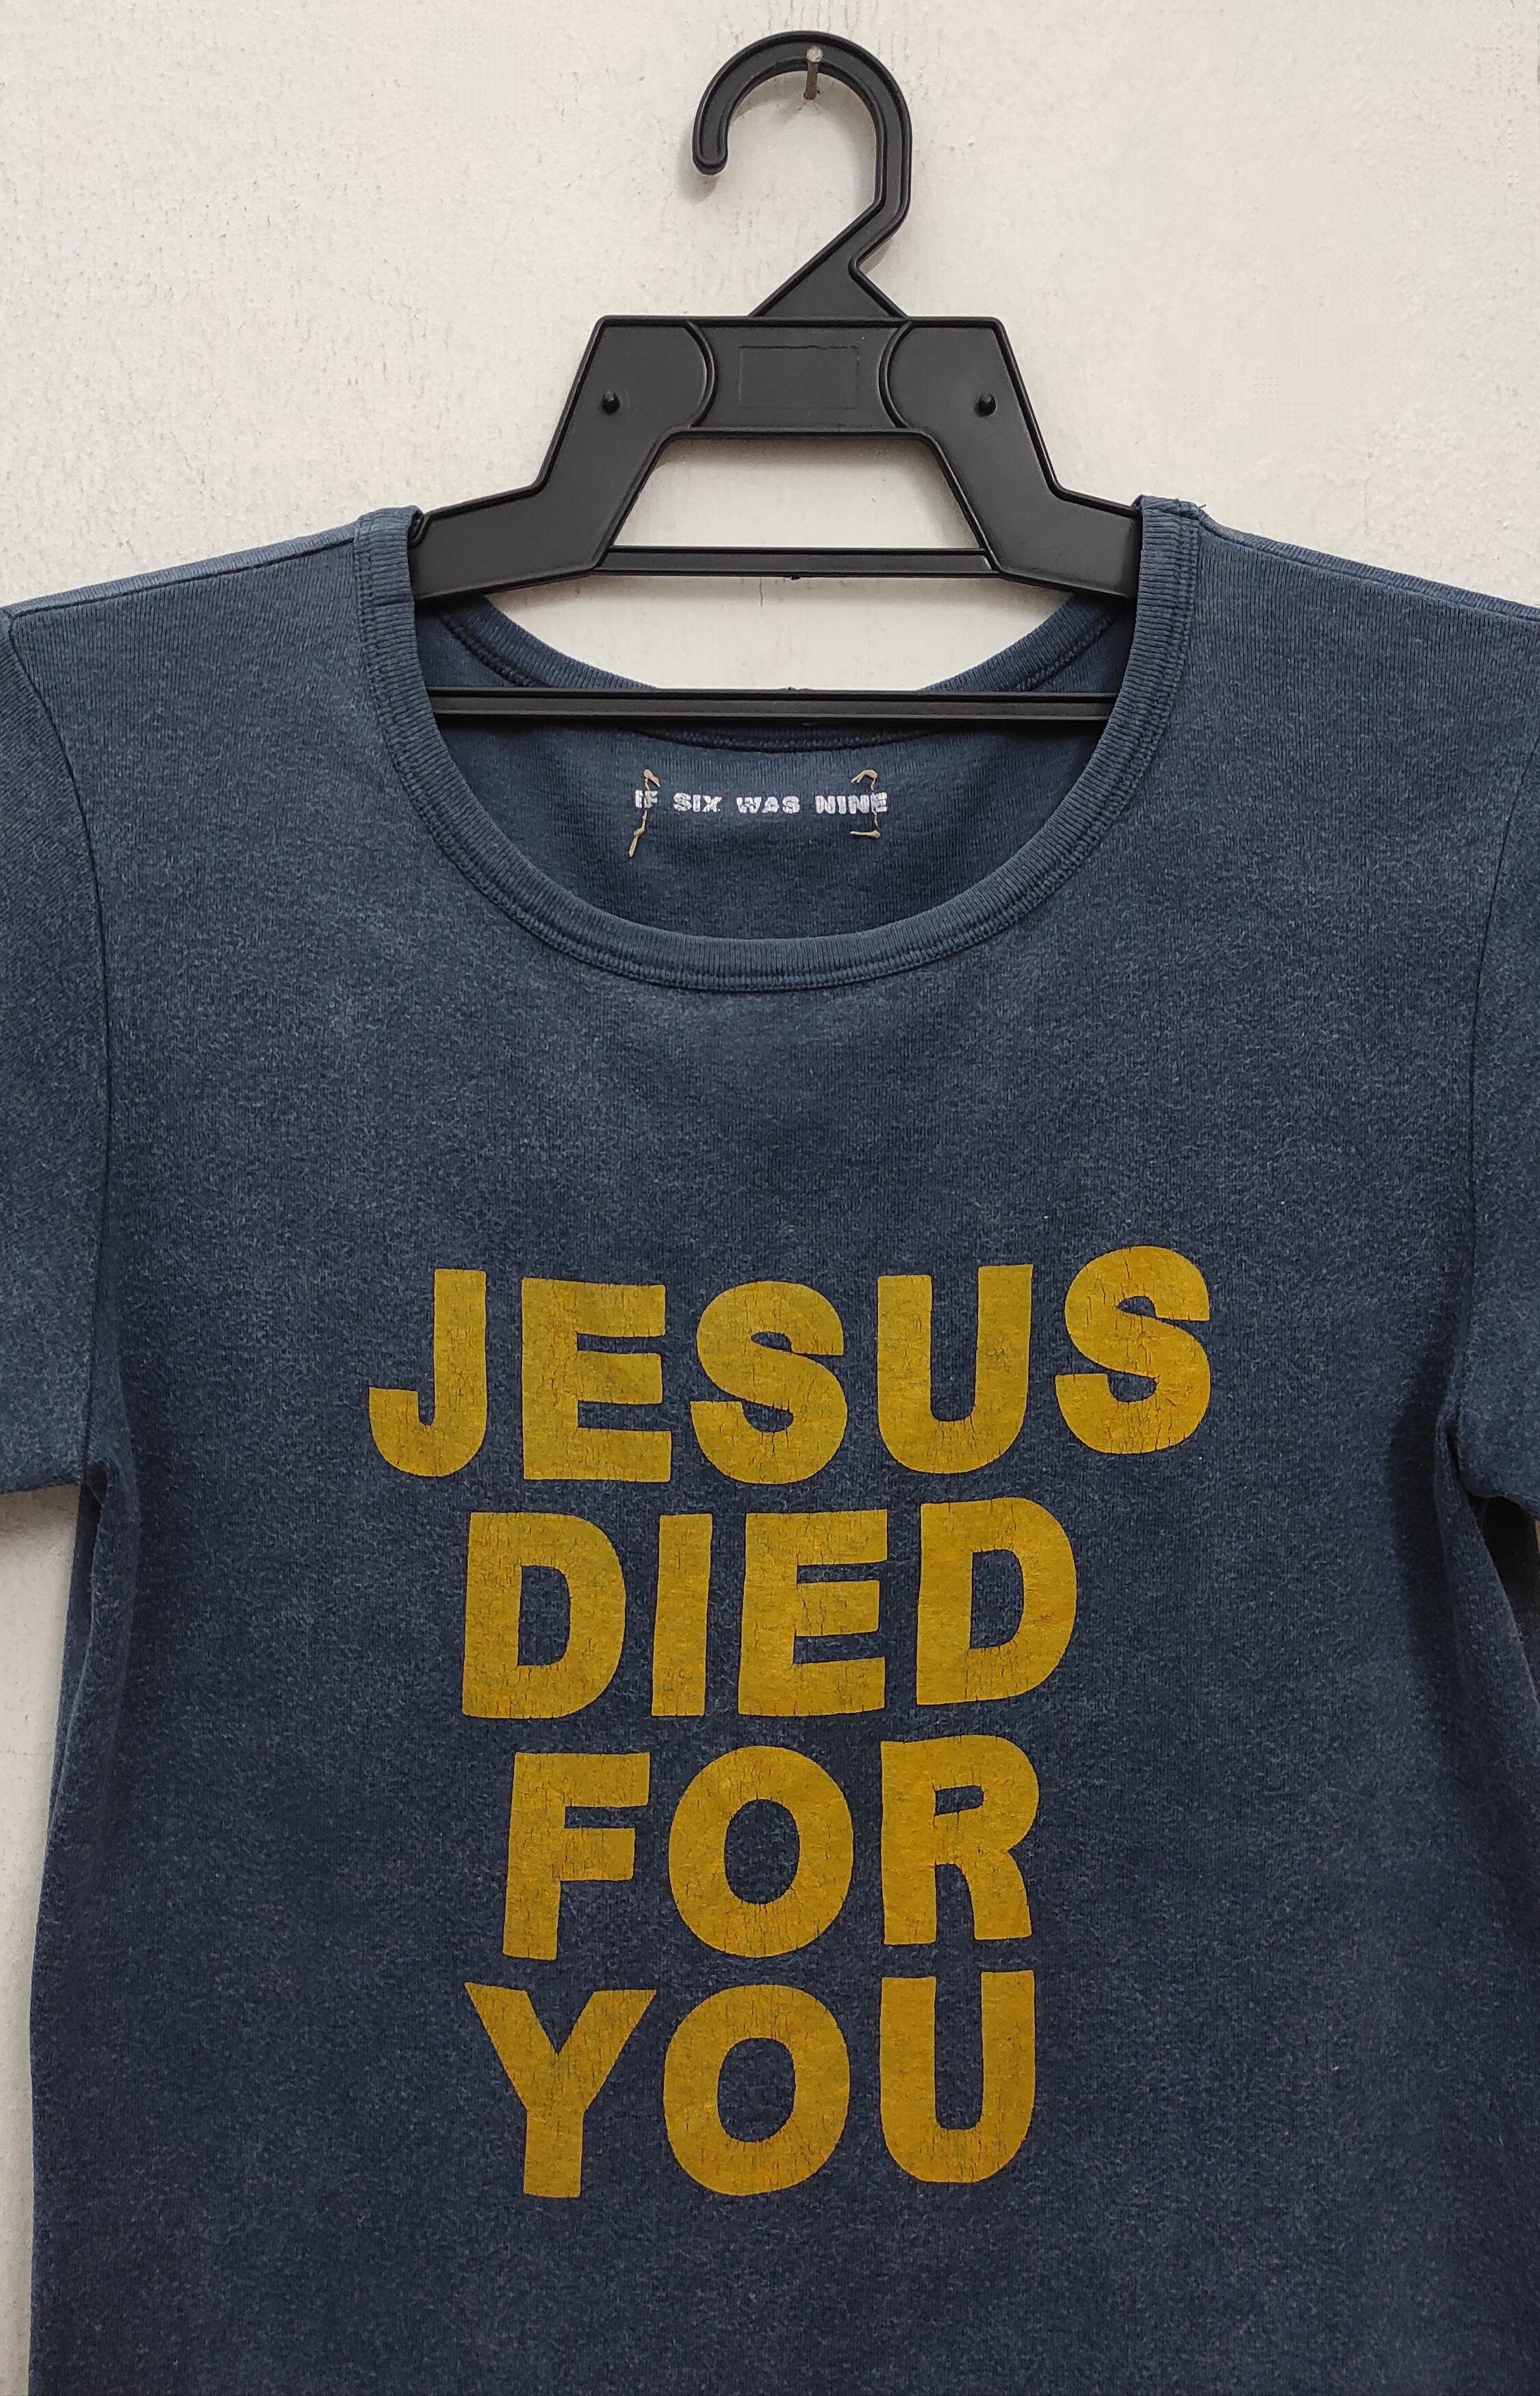 Archival Clothing Archive IF SIX WAS NINE JESUS DIED FOR YOU 